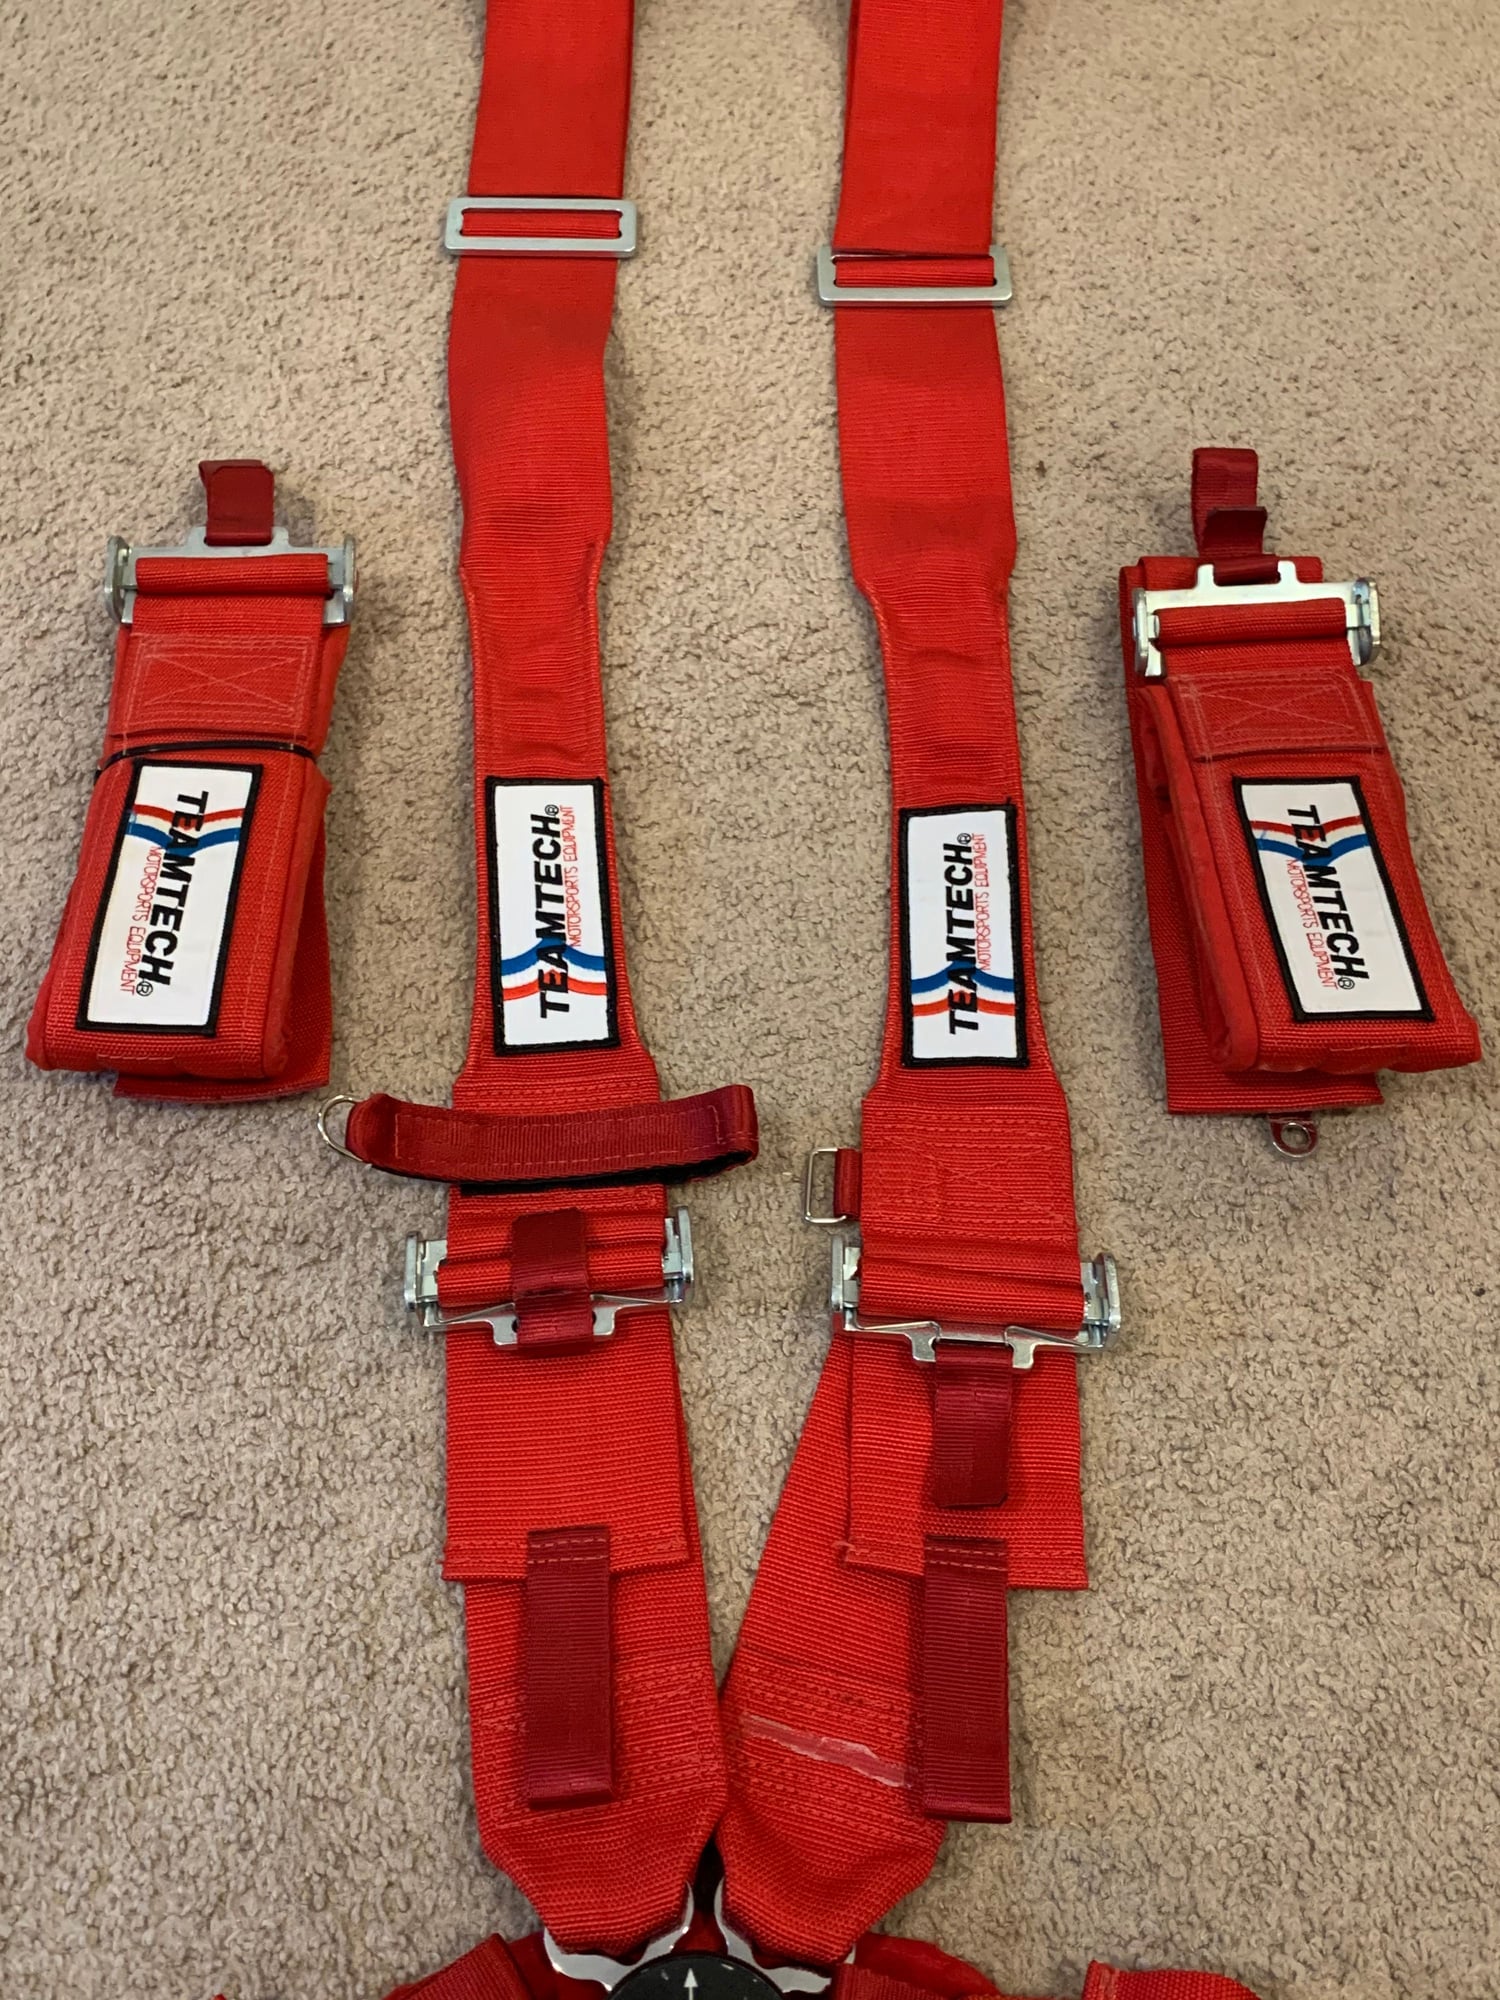 Interior/Upholstery - Teamtech 6-pt cam lock harness, pelvic pad, sternum strap, Hans compatible, red - Used - Charlotte, NC 28032, United States